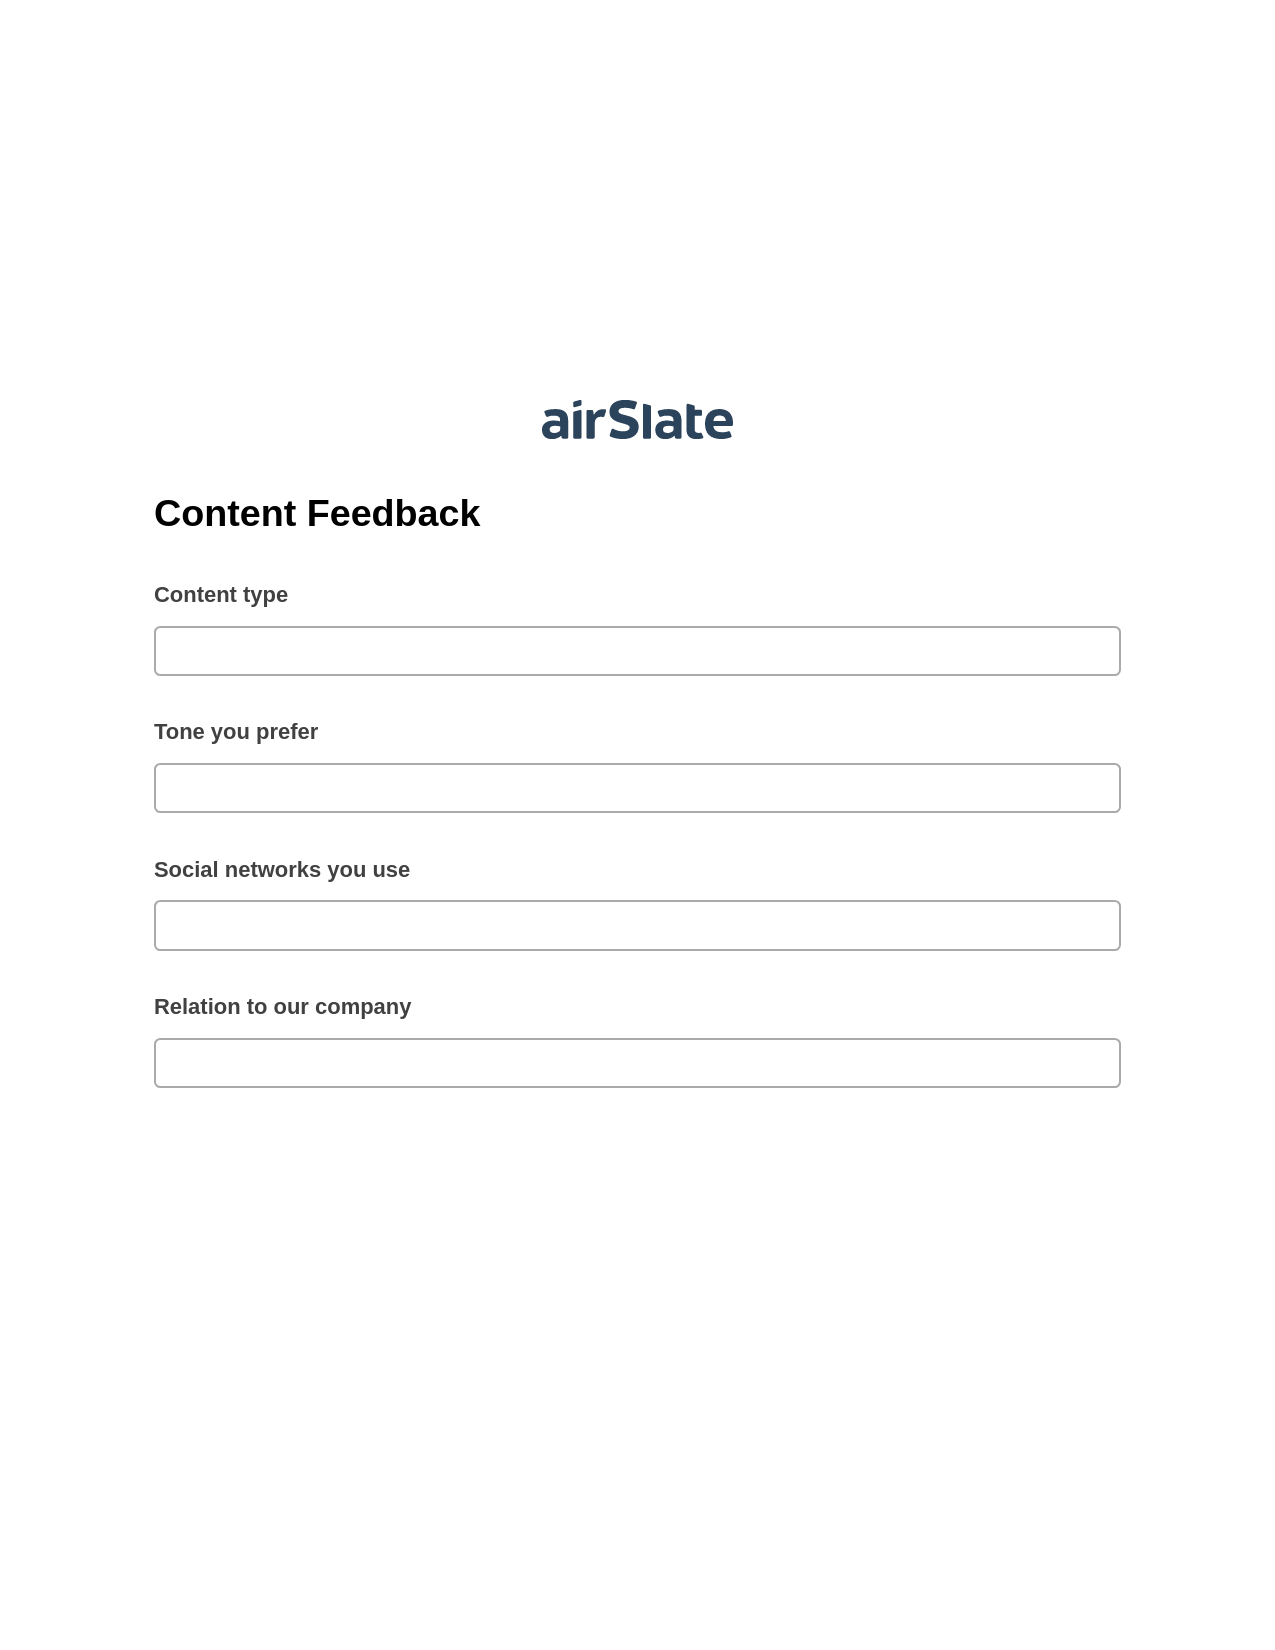 Content Feedback Pre-fill Dropdowns from MySQL Bot, Lock the slate bot, Export to Excel 365 Bot